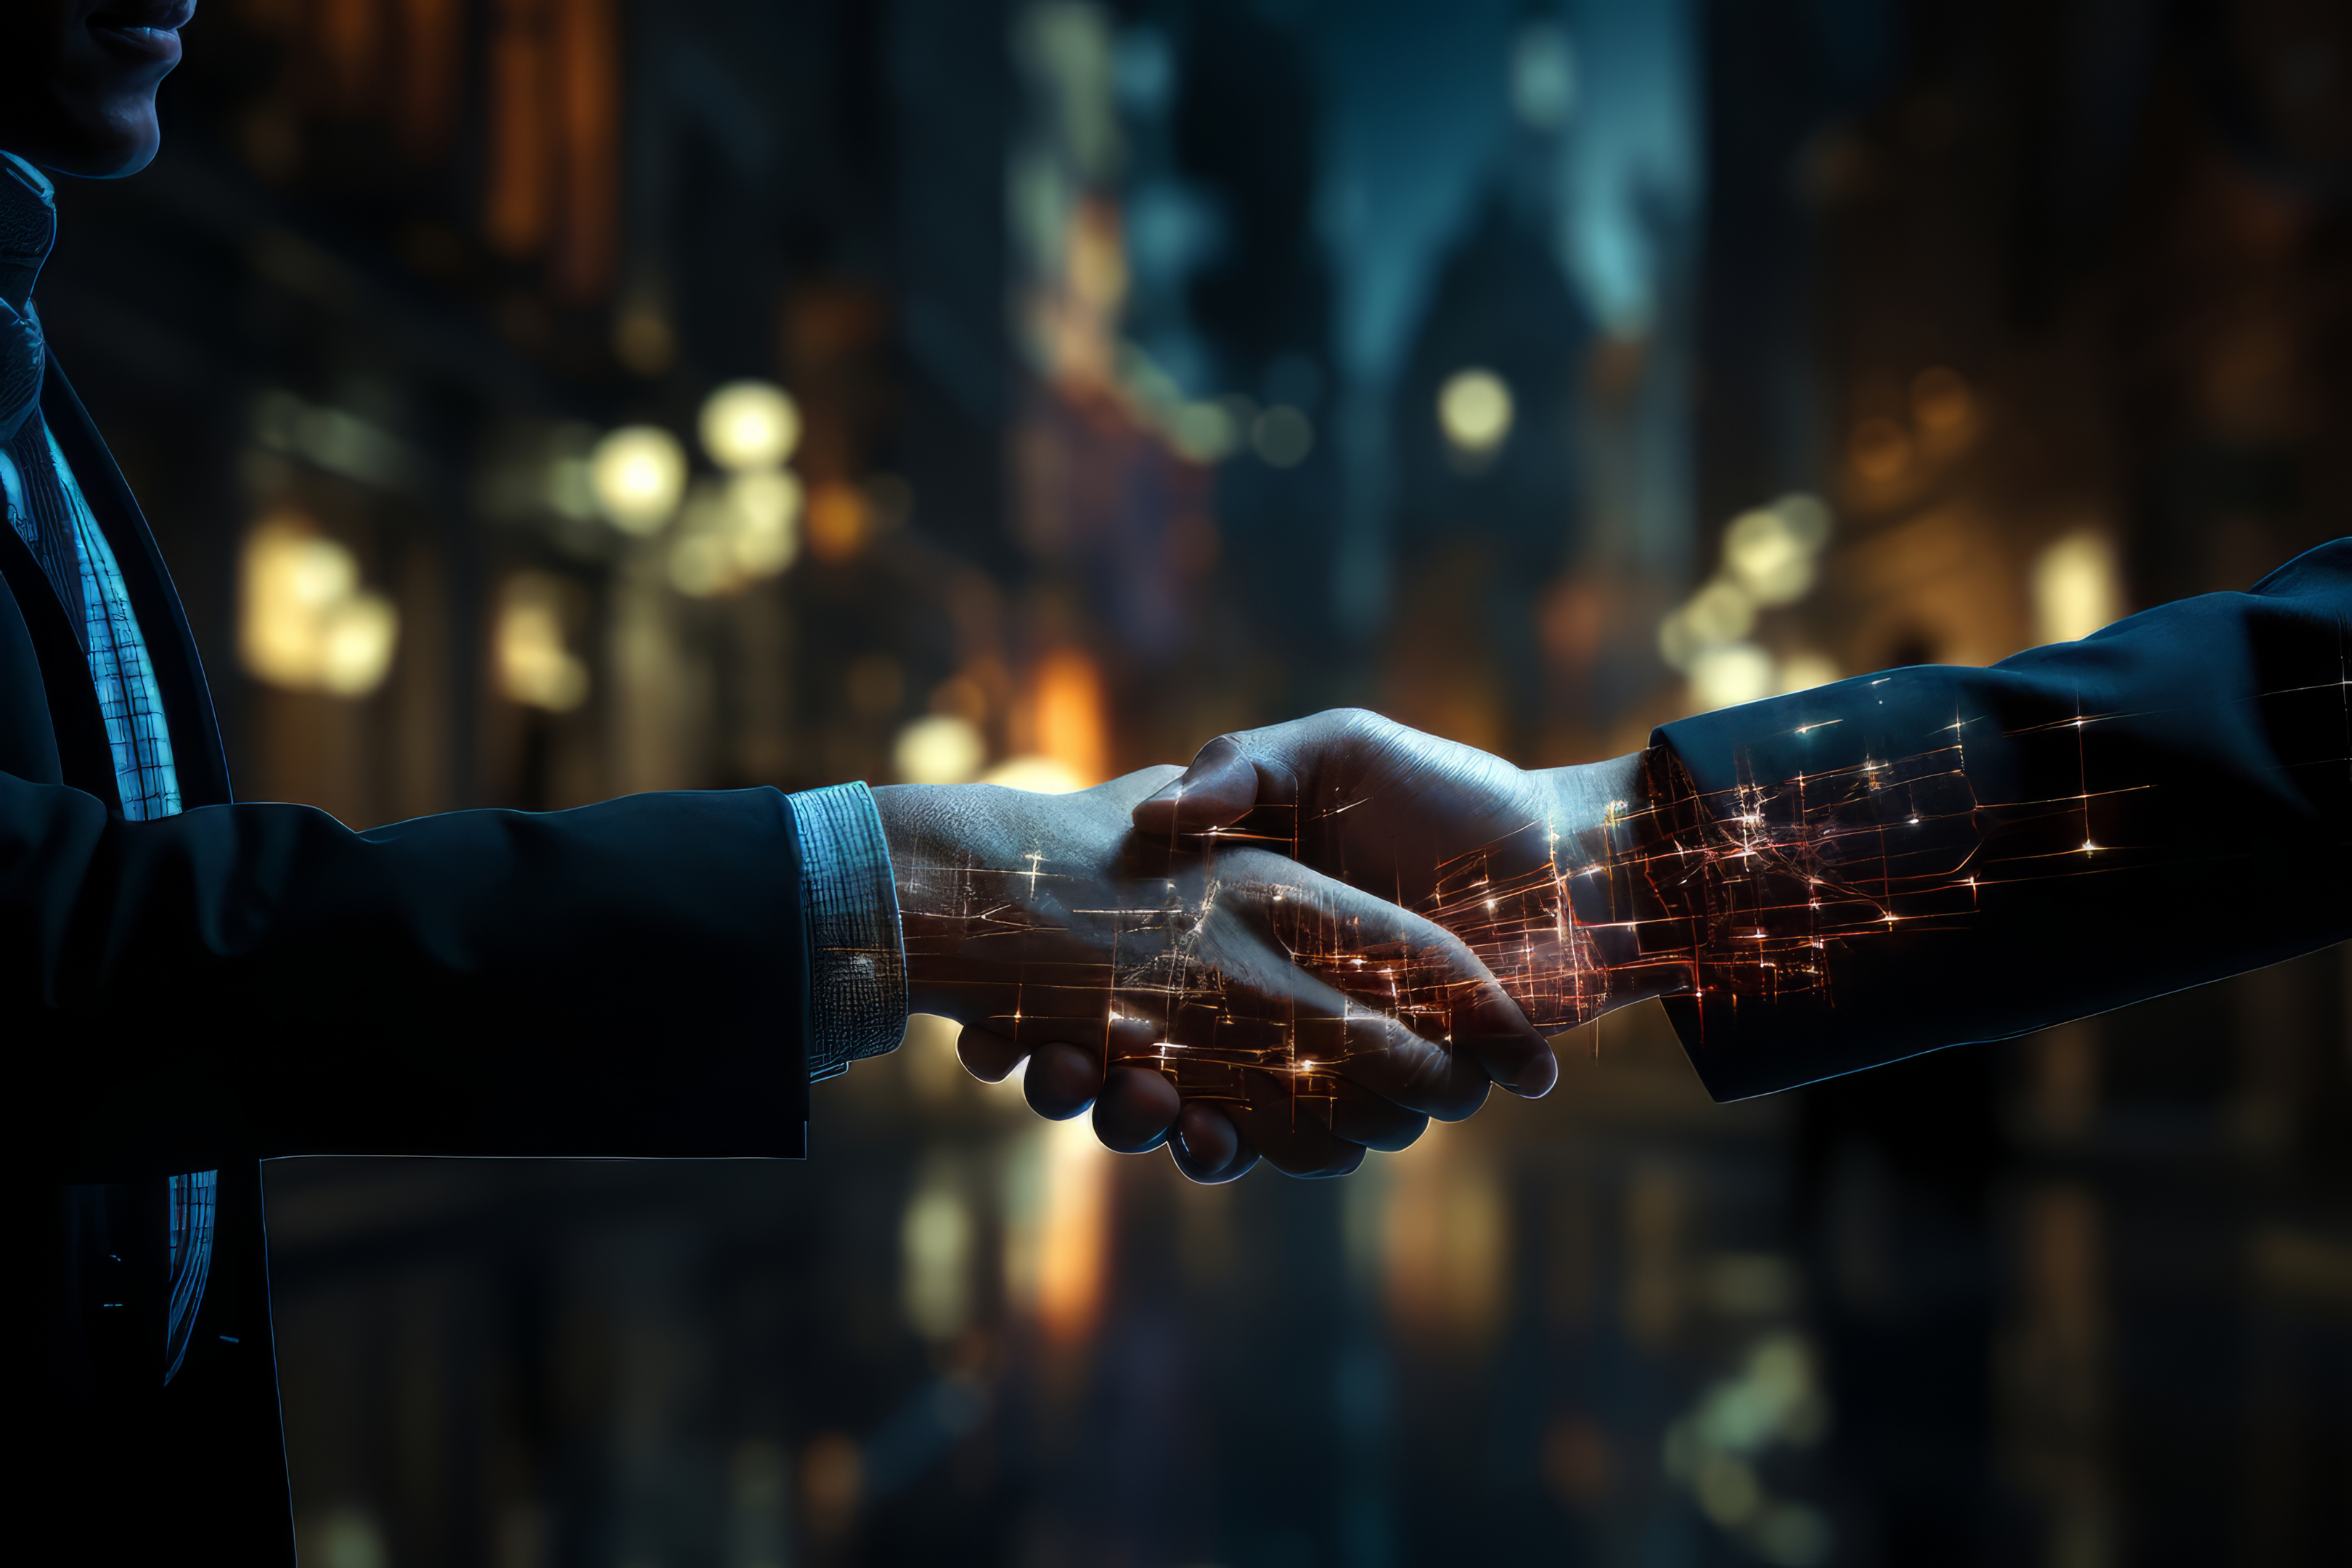 The image depicts a handshake in a futuristic style